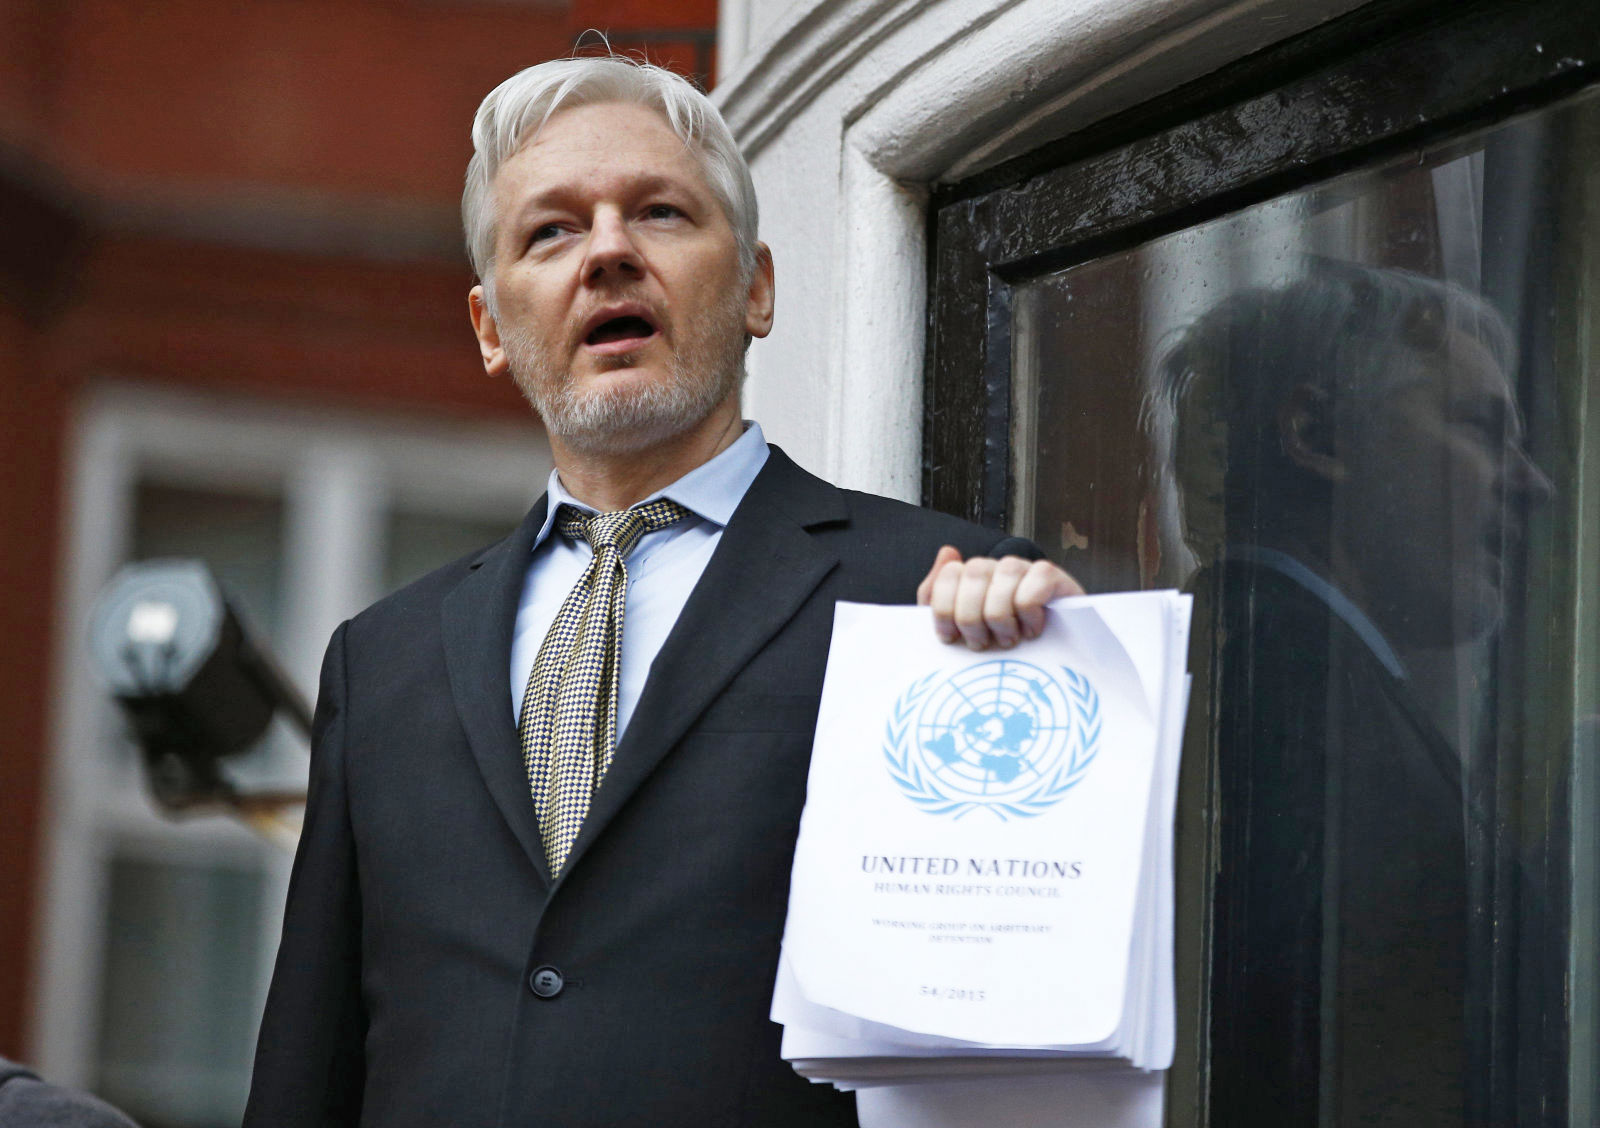 Possible hand-over of Julian Assange to the UK may be imminent.